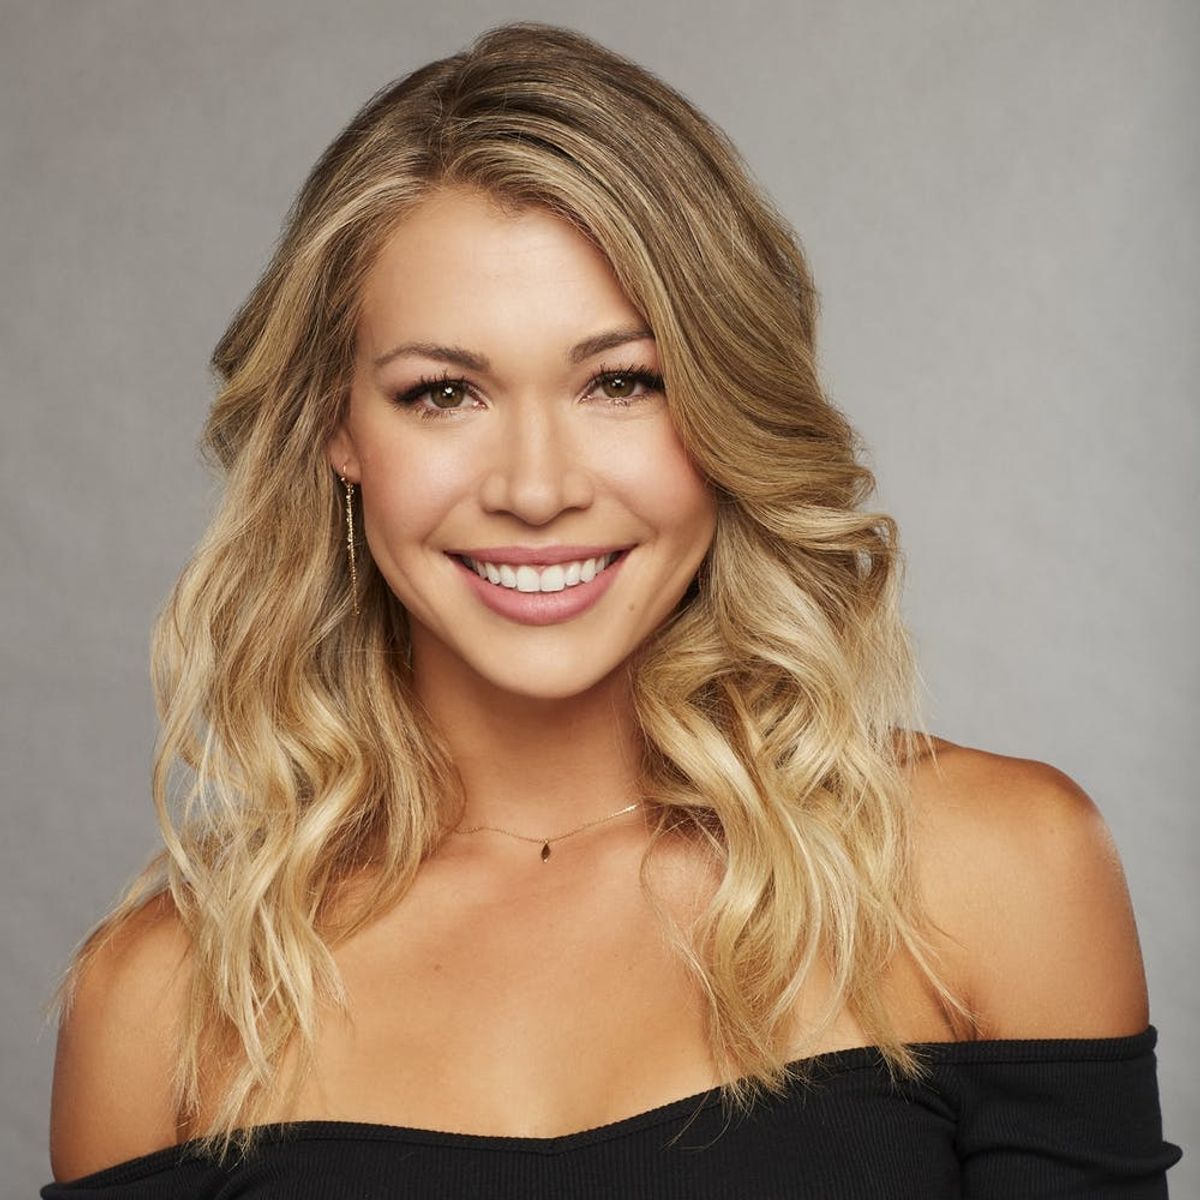 The Bachelor’s Krystal Nielson Shares Some Surprises and Behind-the-Scenes Scoop from the Show